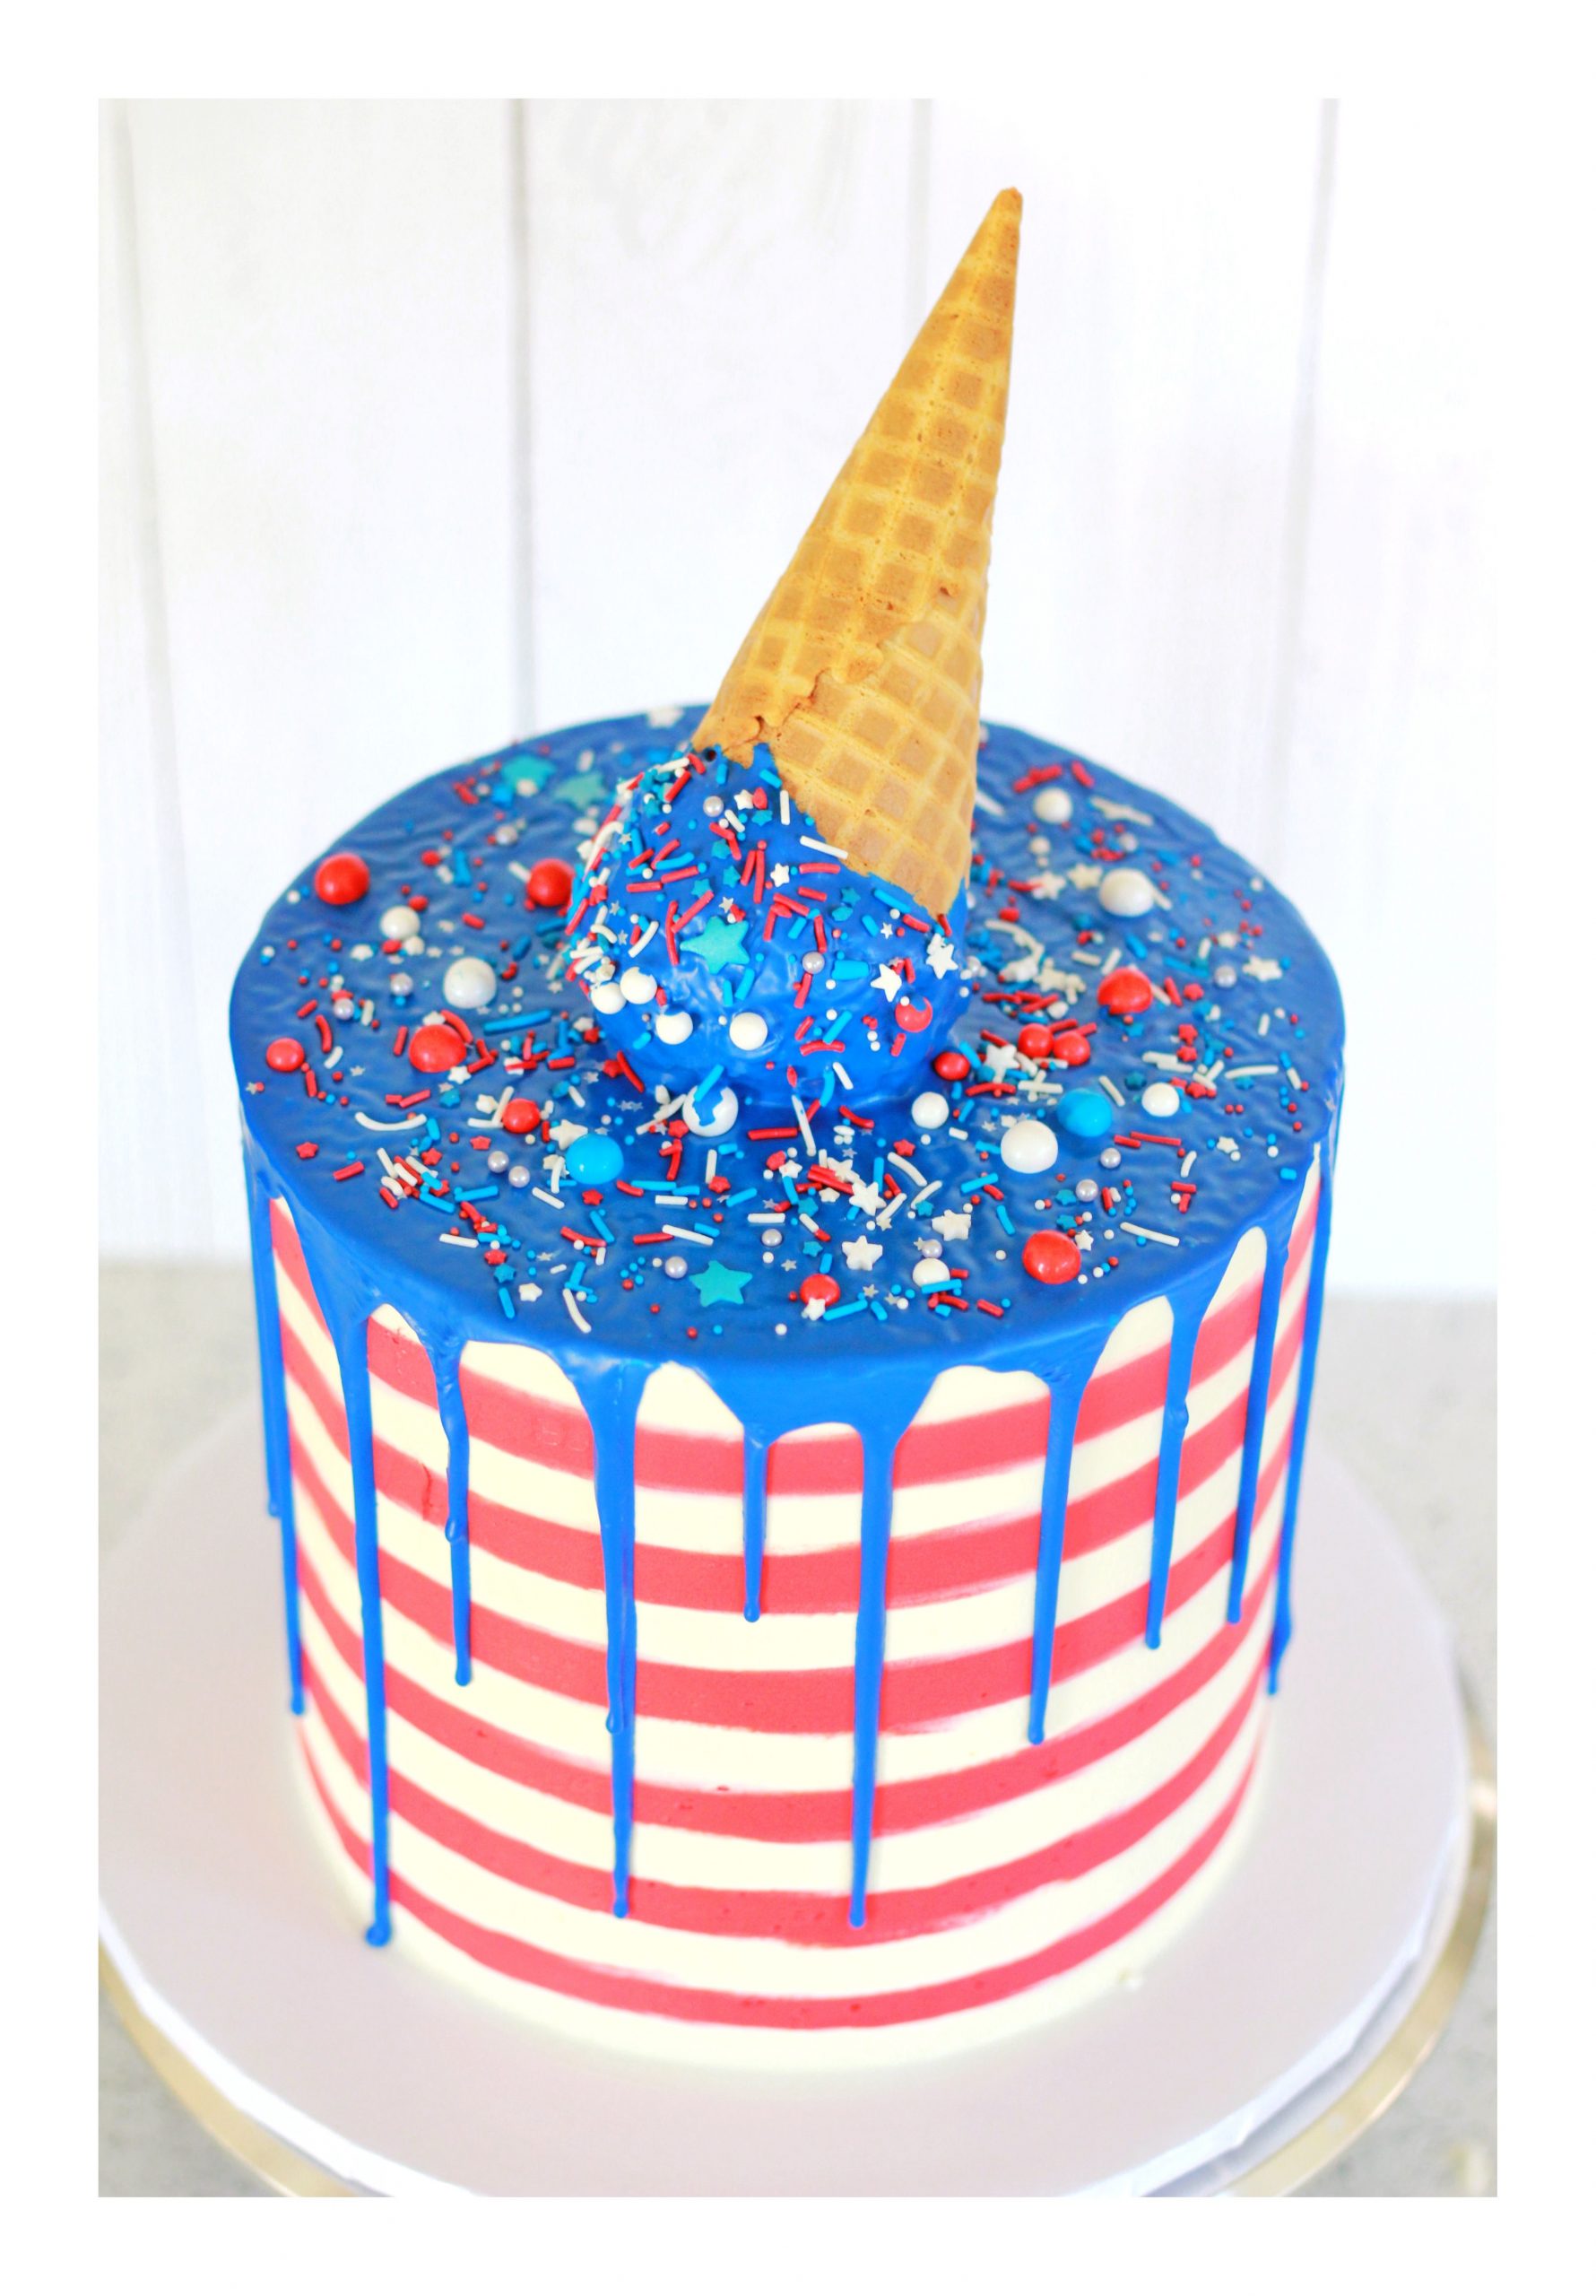 4th of July cake, melted ice cream cake, striped buttercream